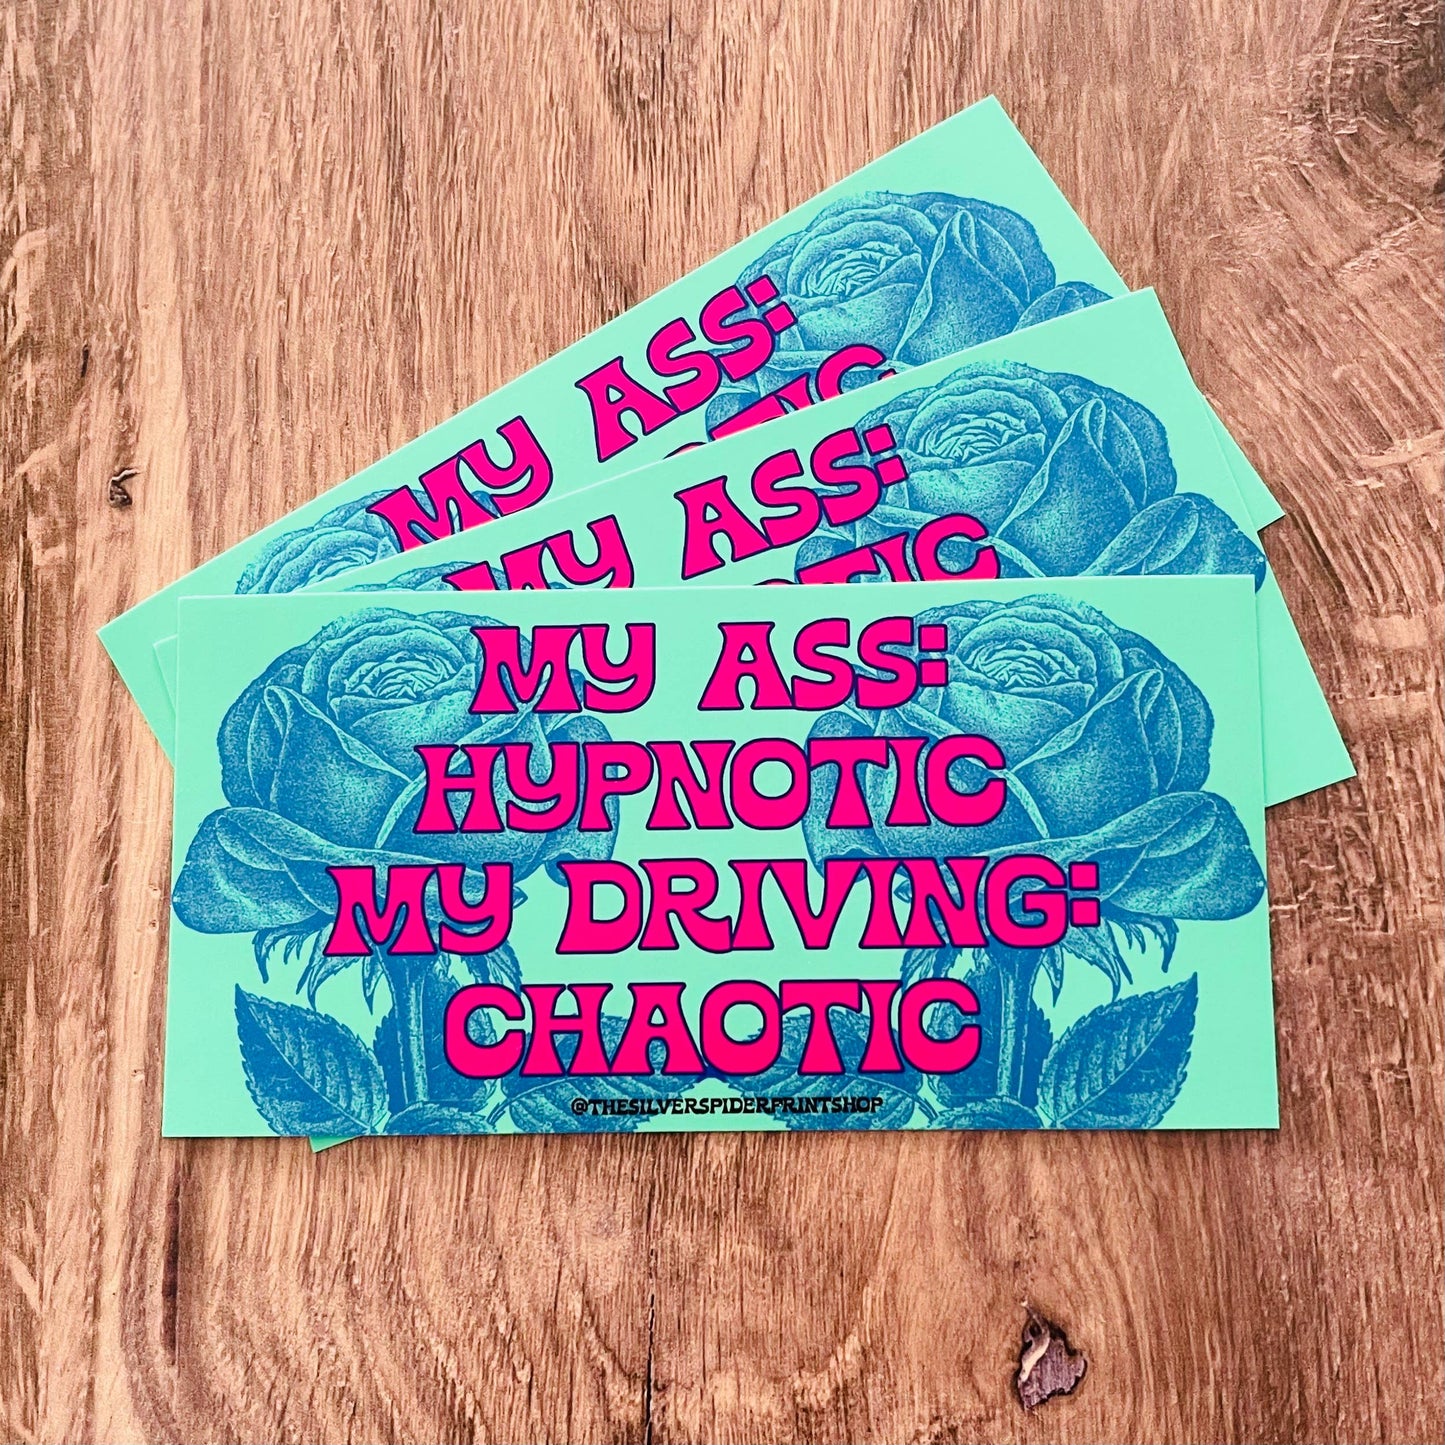 My ass hypnotic my driving chaotic Bumper Sticker funny